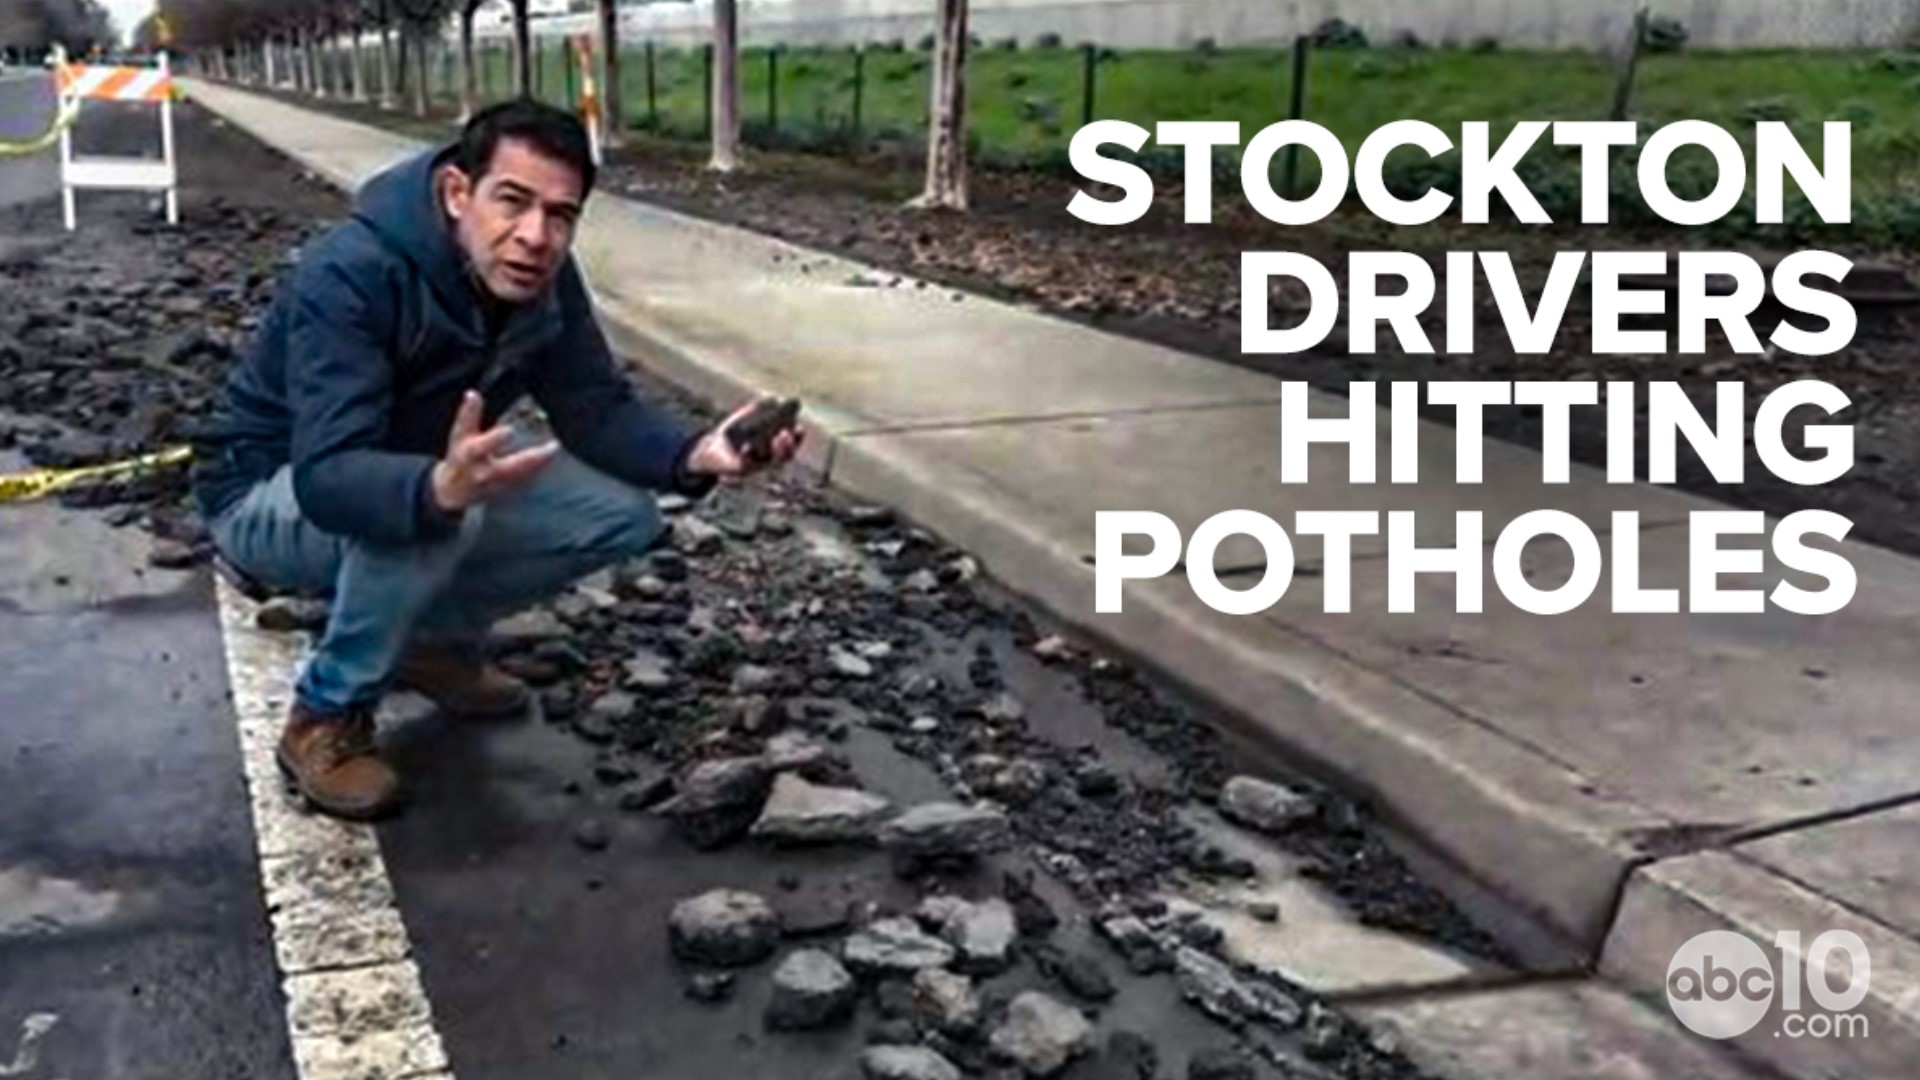 Stockton drivers are hitting potholes across the city and some are causing major damage to their vehicles according to residents and local mechanics.